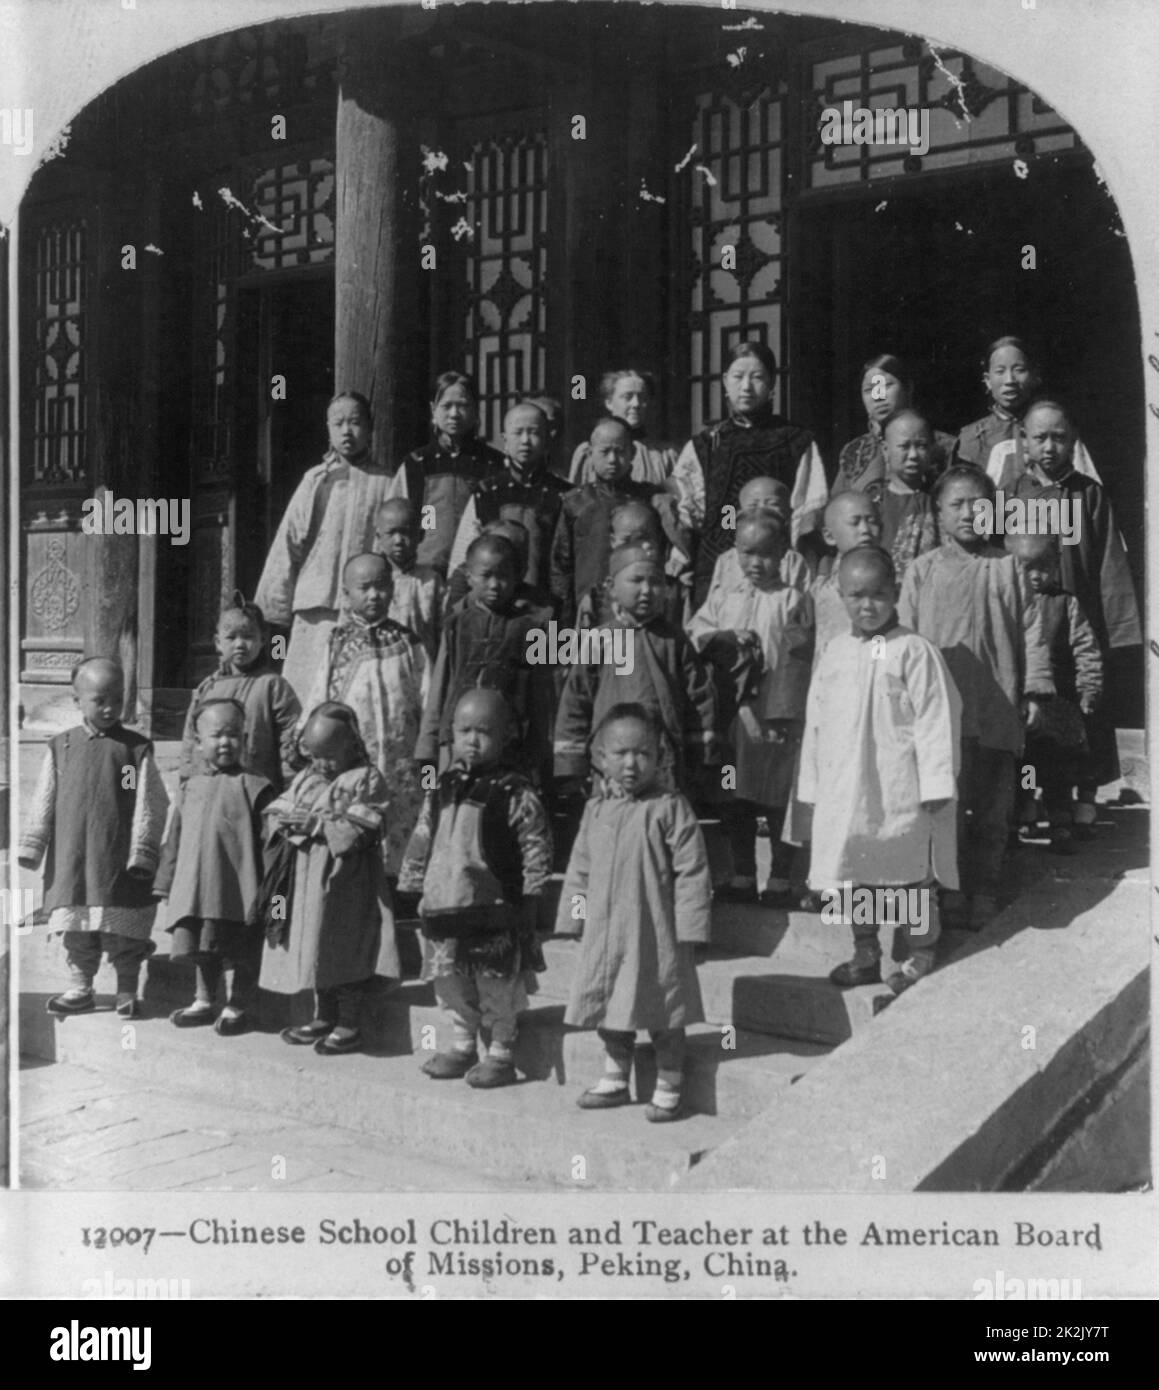 Chinese school children and teacher [standing on steps] at the American Board of Missions, Peking, China Published: c1900. photographic print or stereo card /stereograph. Stock Photo